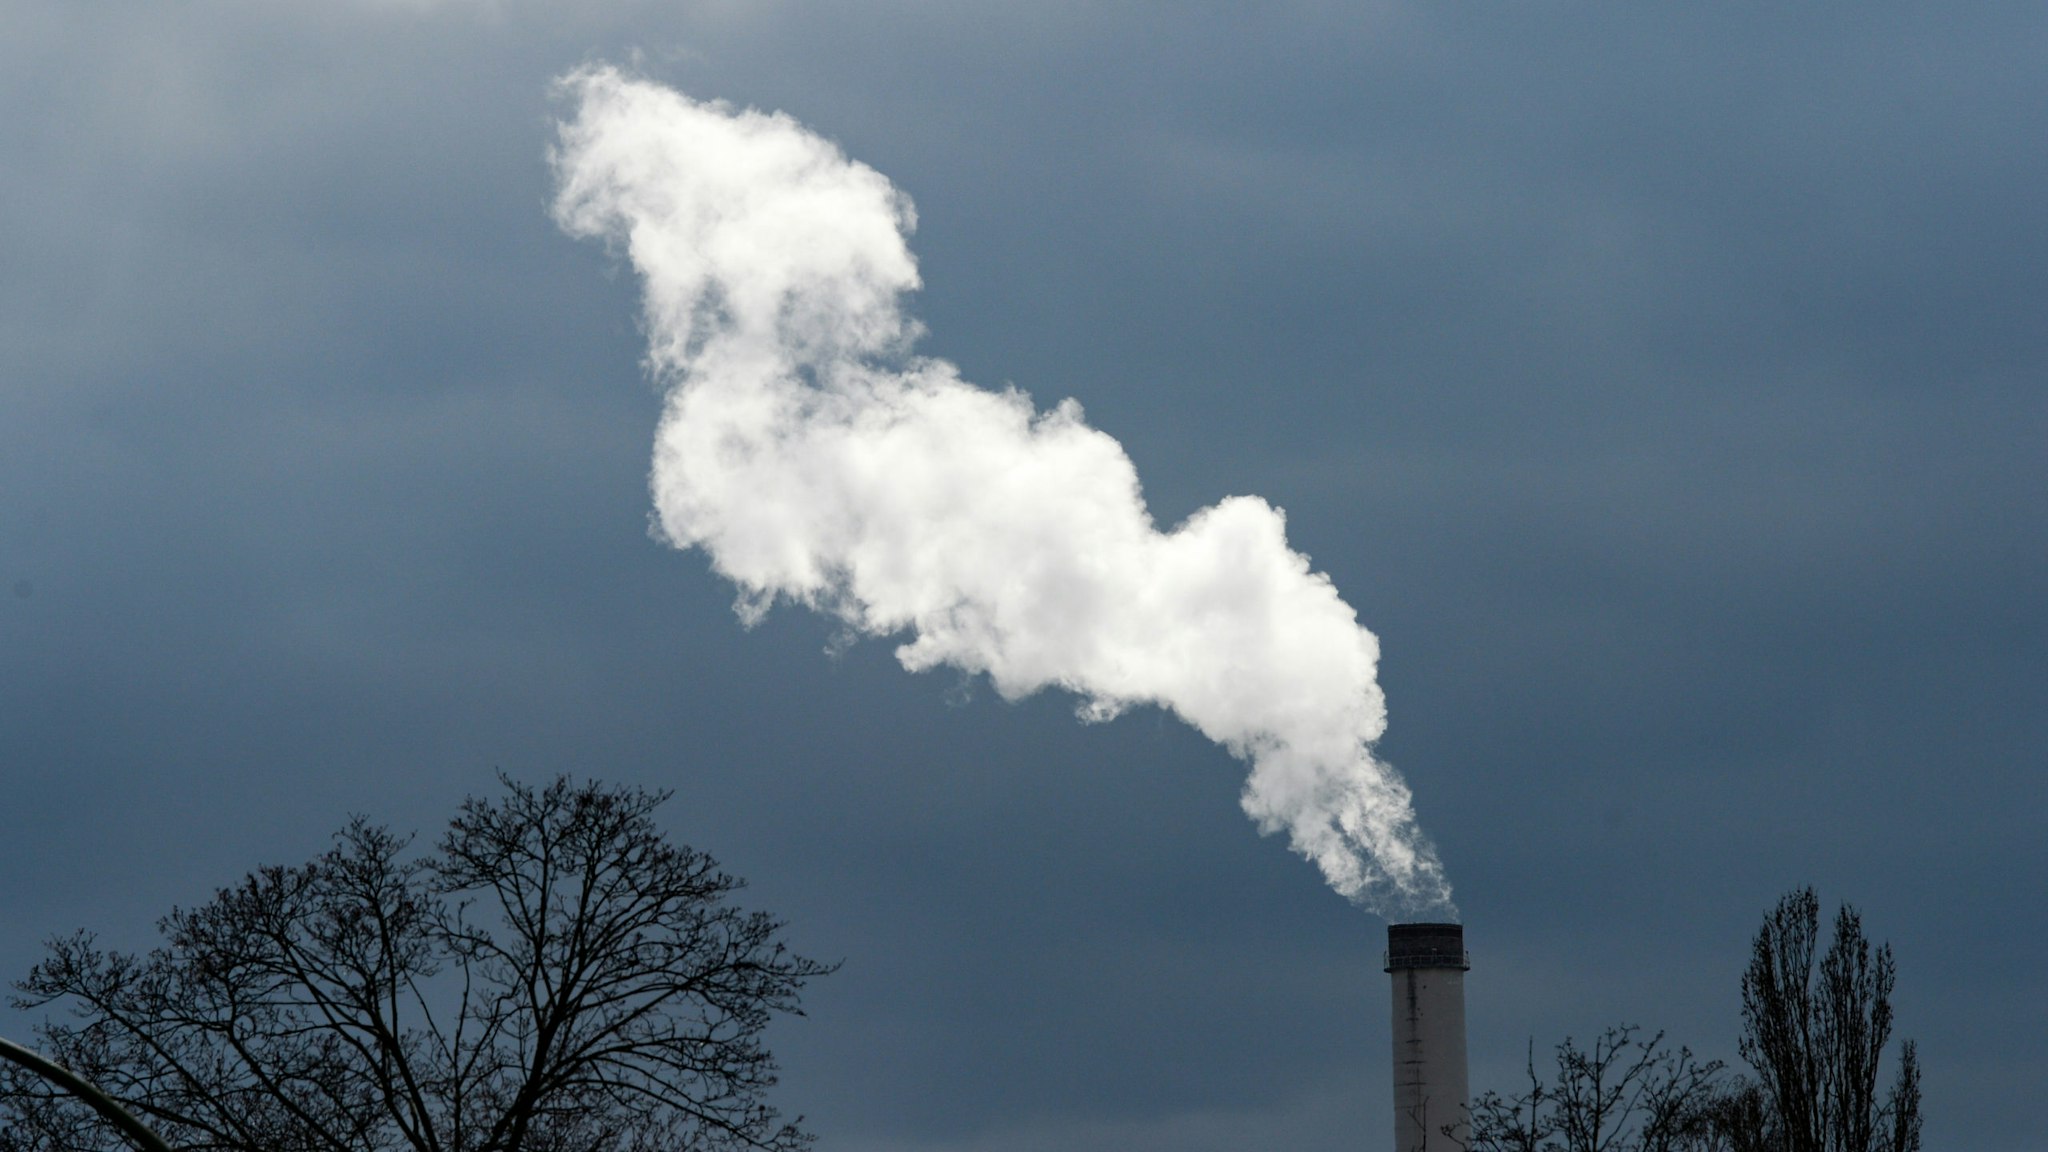 31 March 2020, Berlin: Smoke rises into the sky from a chimney of the Klingenberg combined heat and power plant in the Berlin district of Rummelsburg. Photo: Jens Kalaene/dpa-Zentralbild/ZB (Photo by Jens Kalaene/picture alliance via Getty Images)